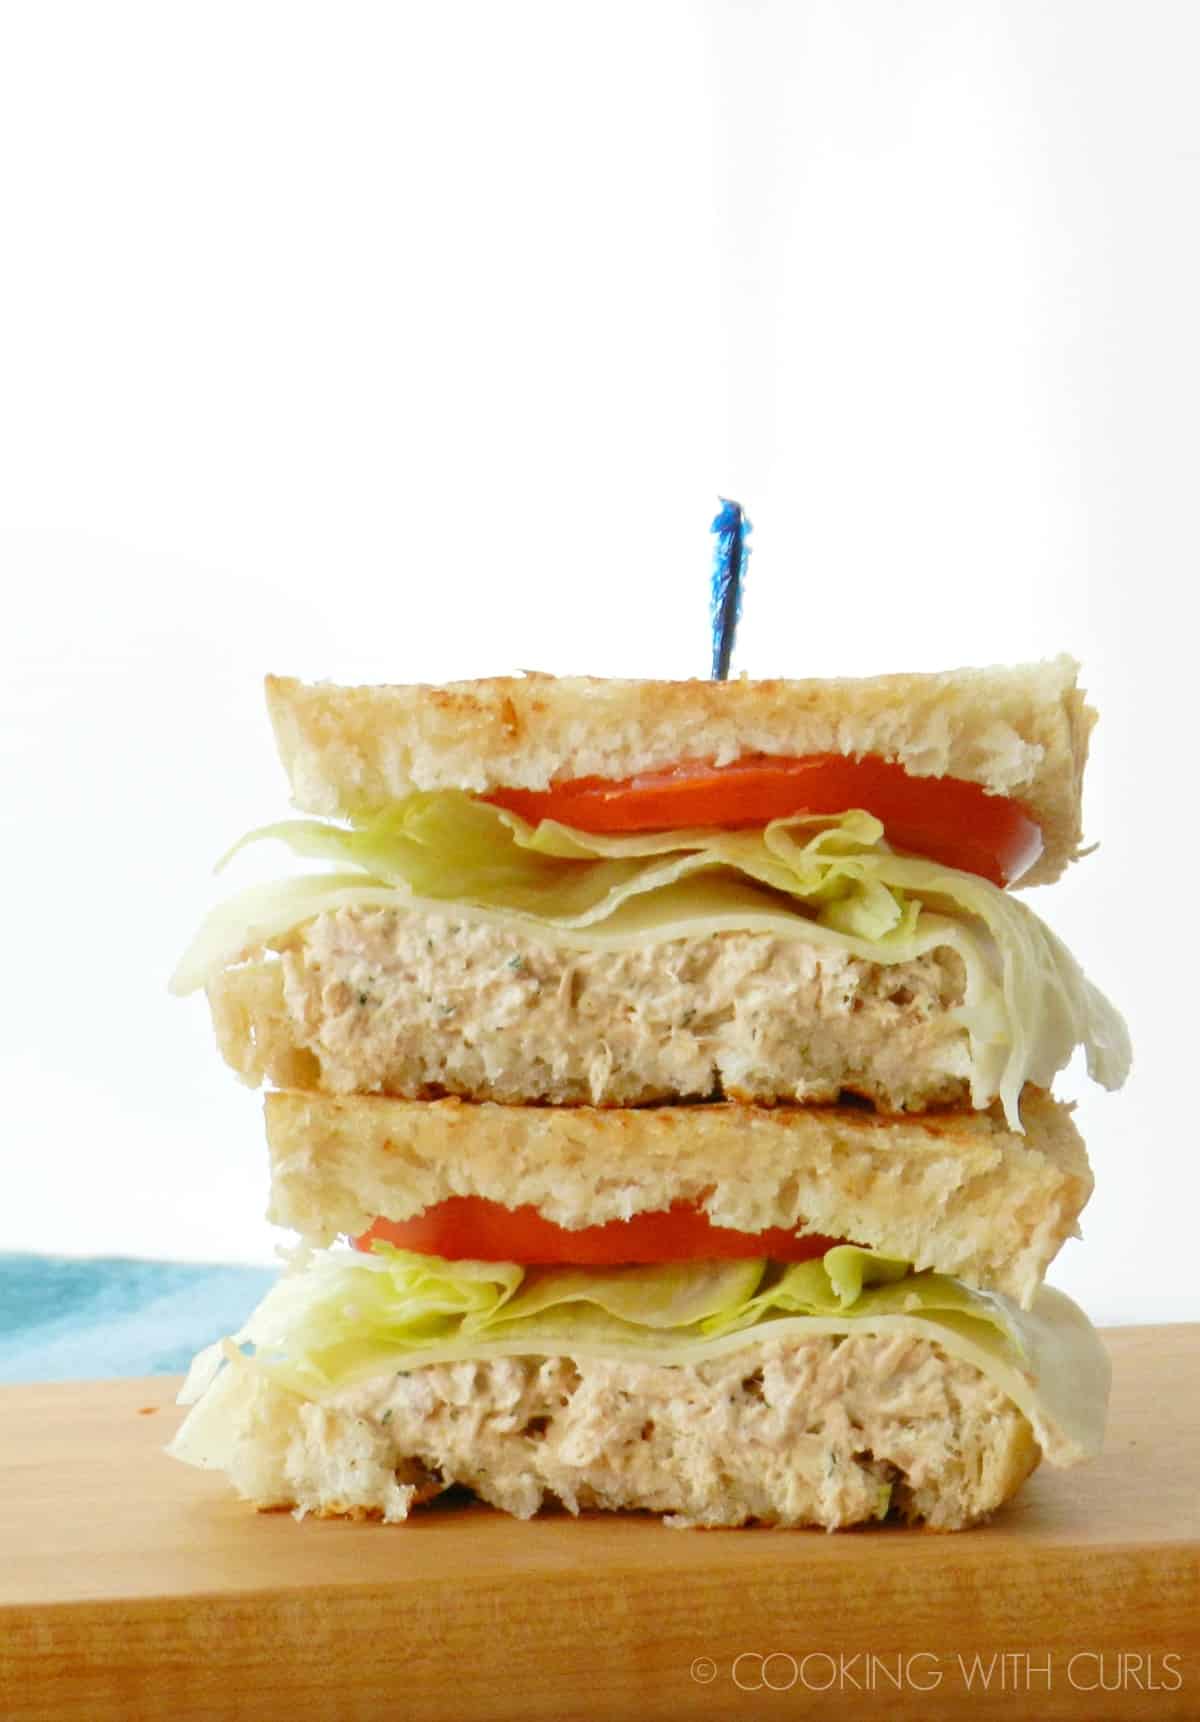 Tuna salad on Grilled Sourdough with provolone cheese, lettuce, and tomato slices cut in half and stacked.